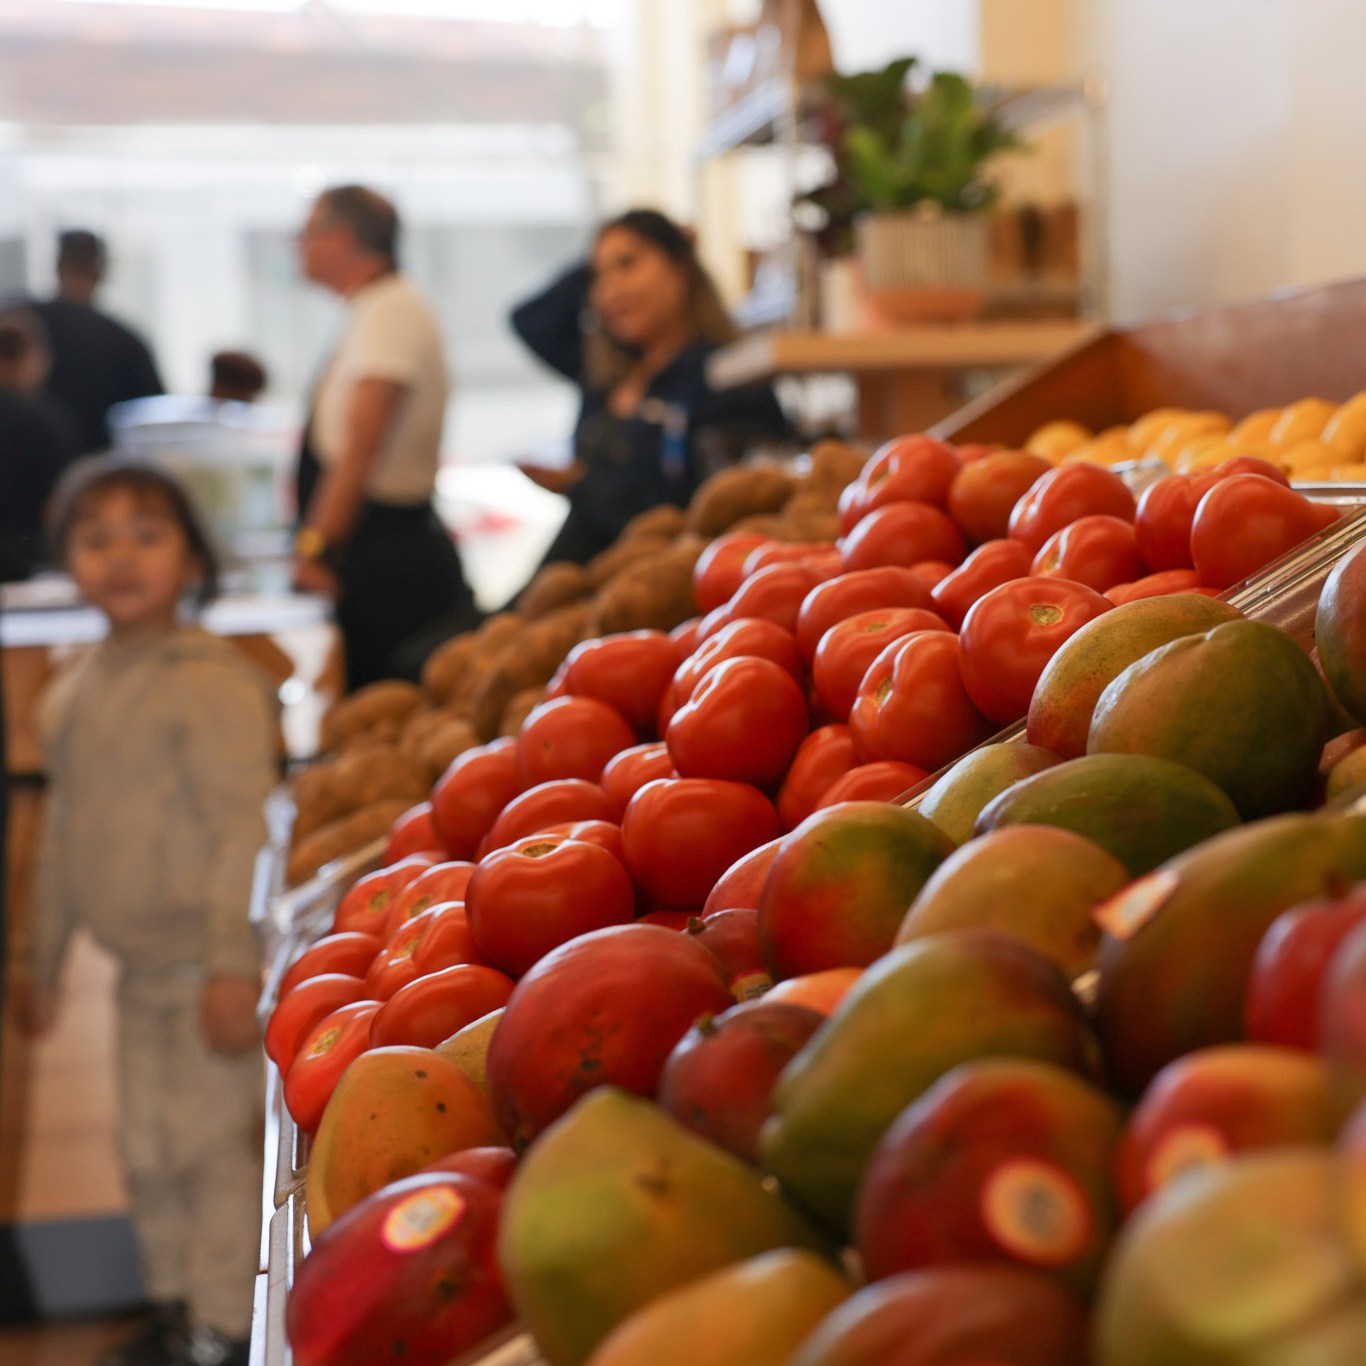 In a grocery store, colorful produce like tomatoes and mangoes are neatly displayed on a shelf, with people and a small child visible in the blurry background.